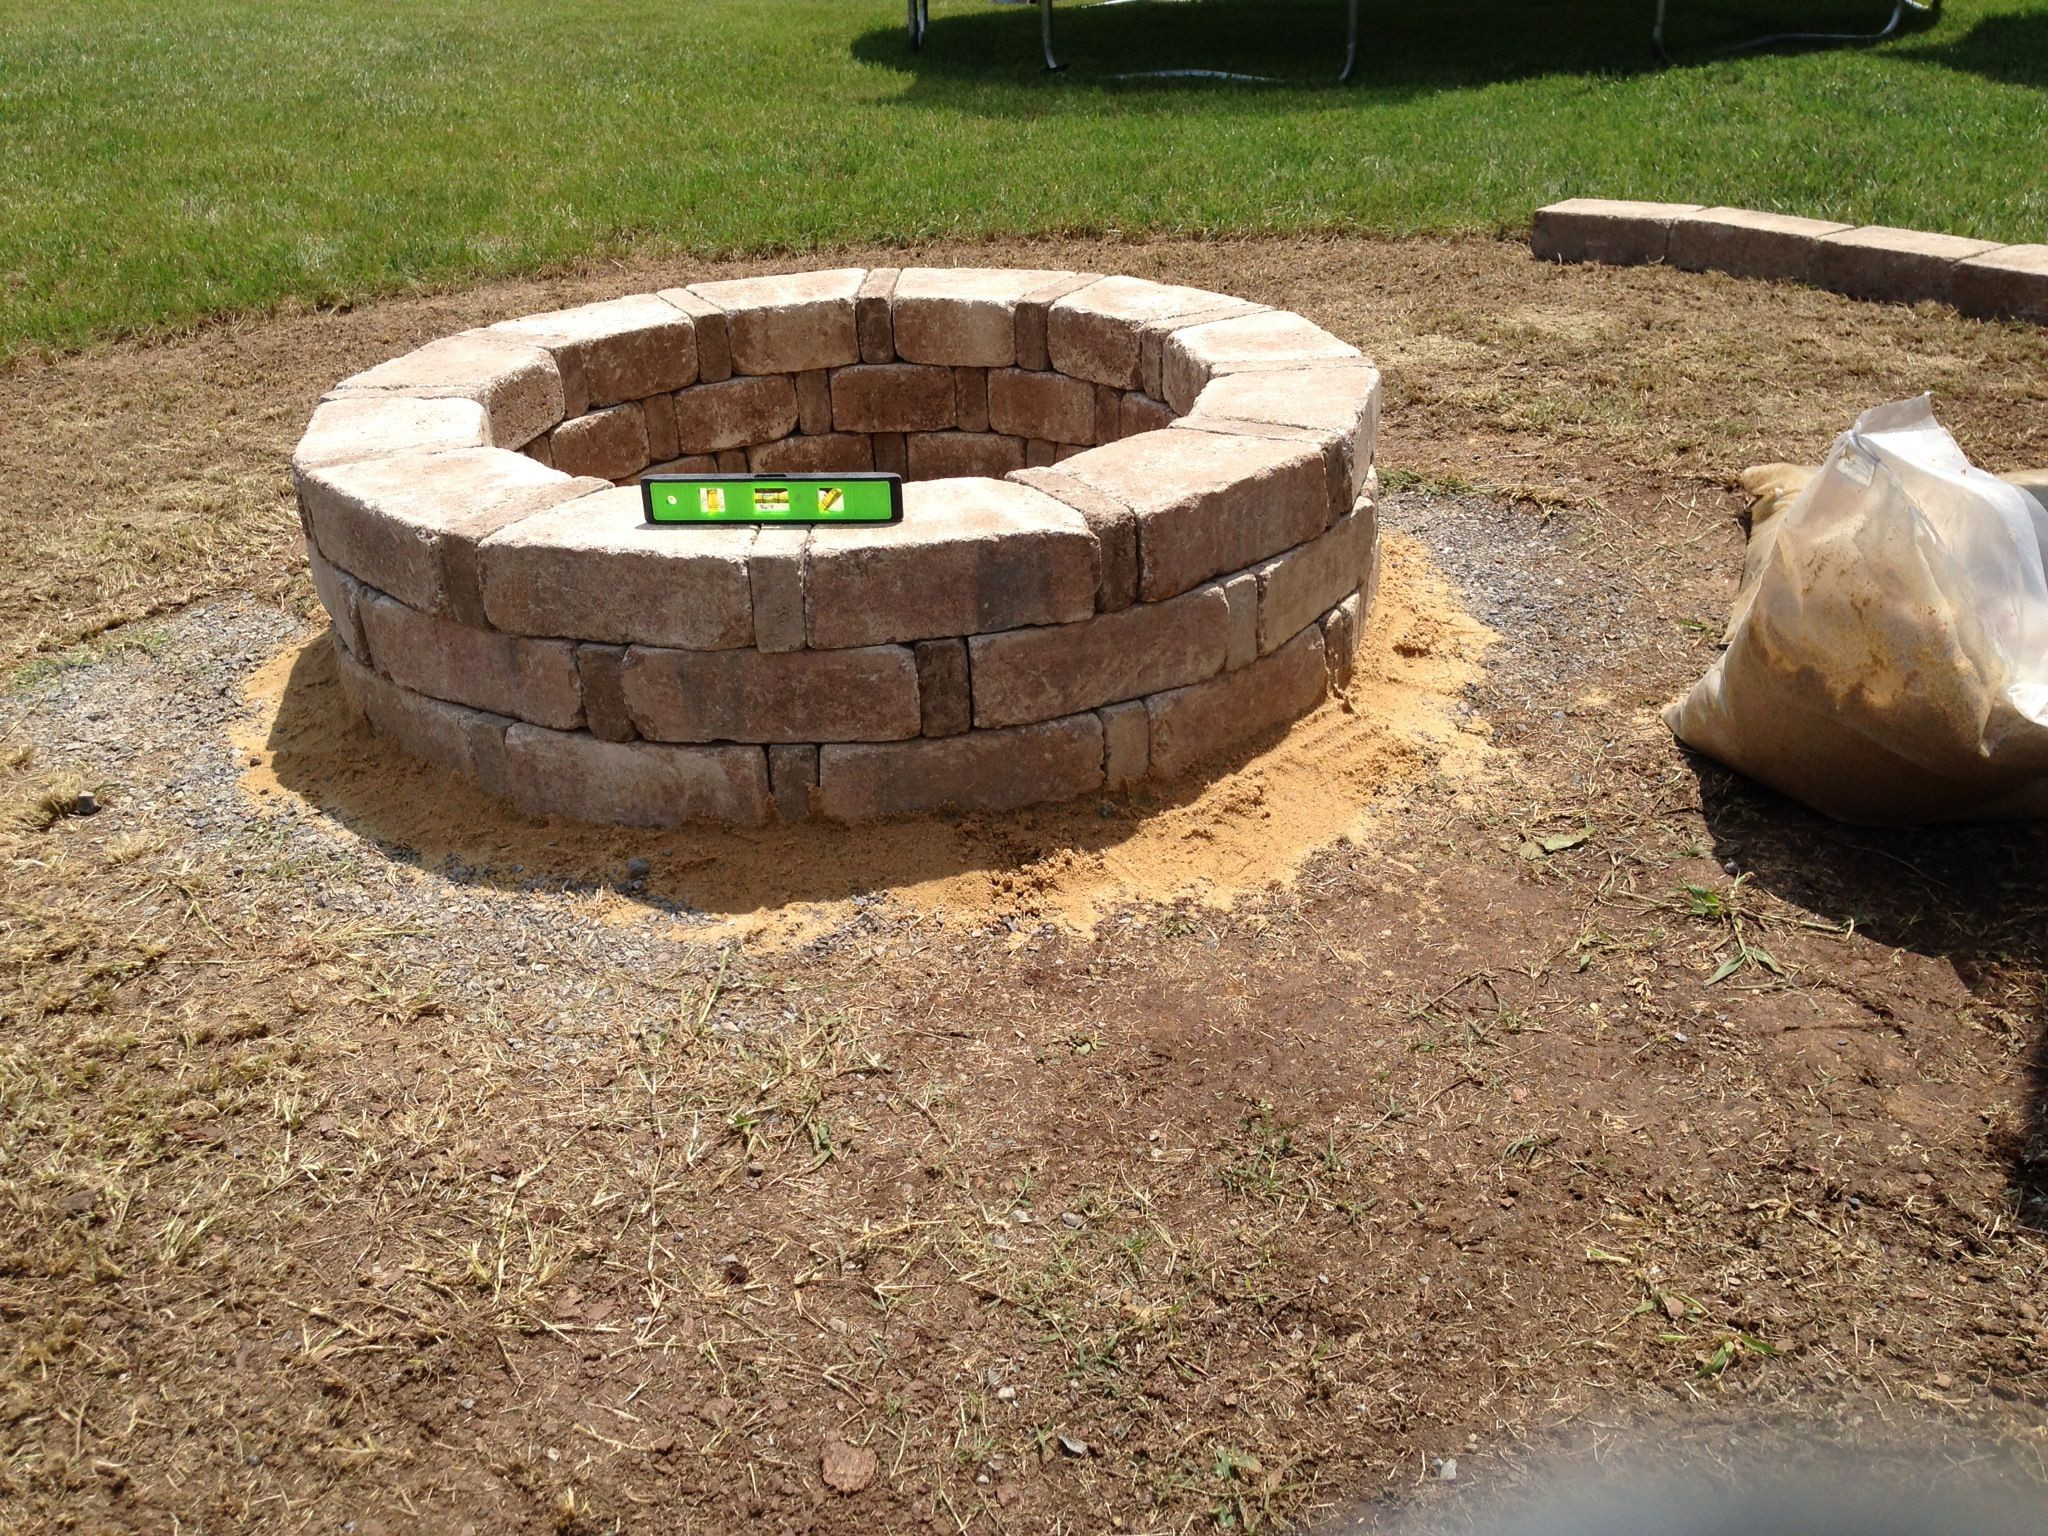 Home Depot Outdoor Fire Pit
 Finished fire pit Rumble stone from Home Depot